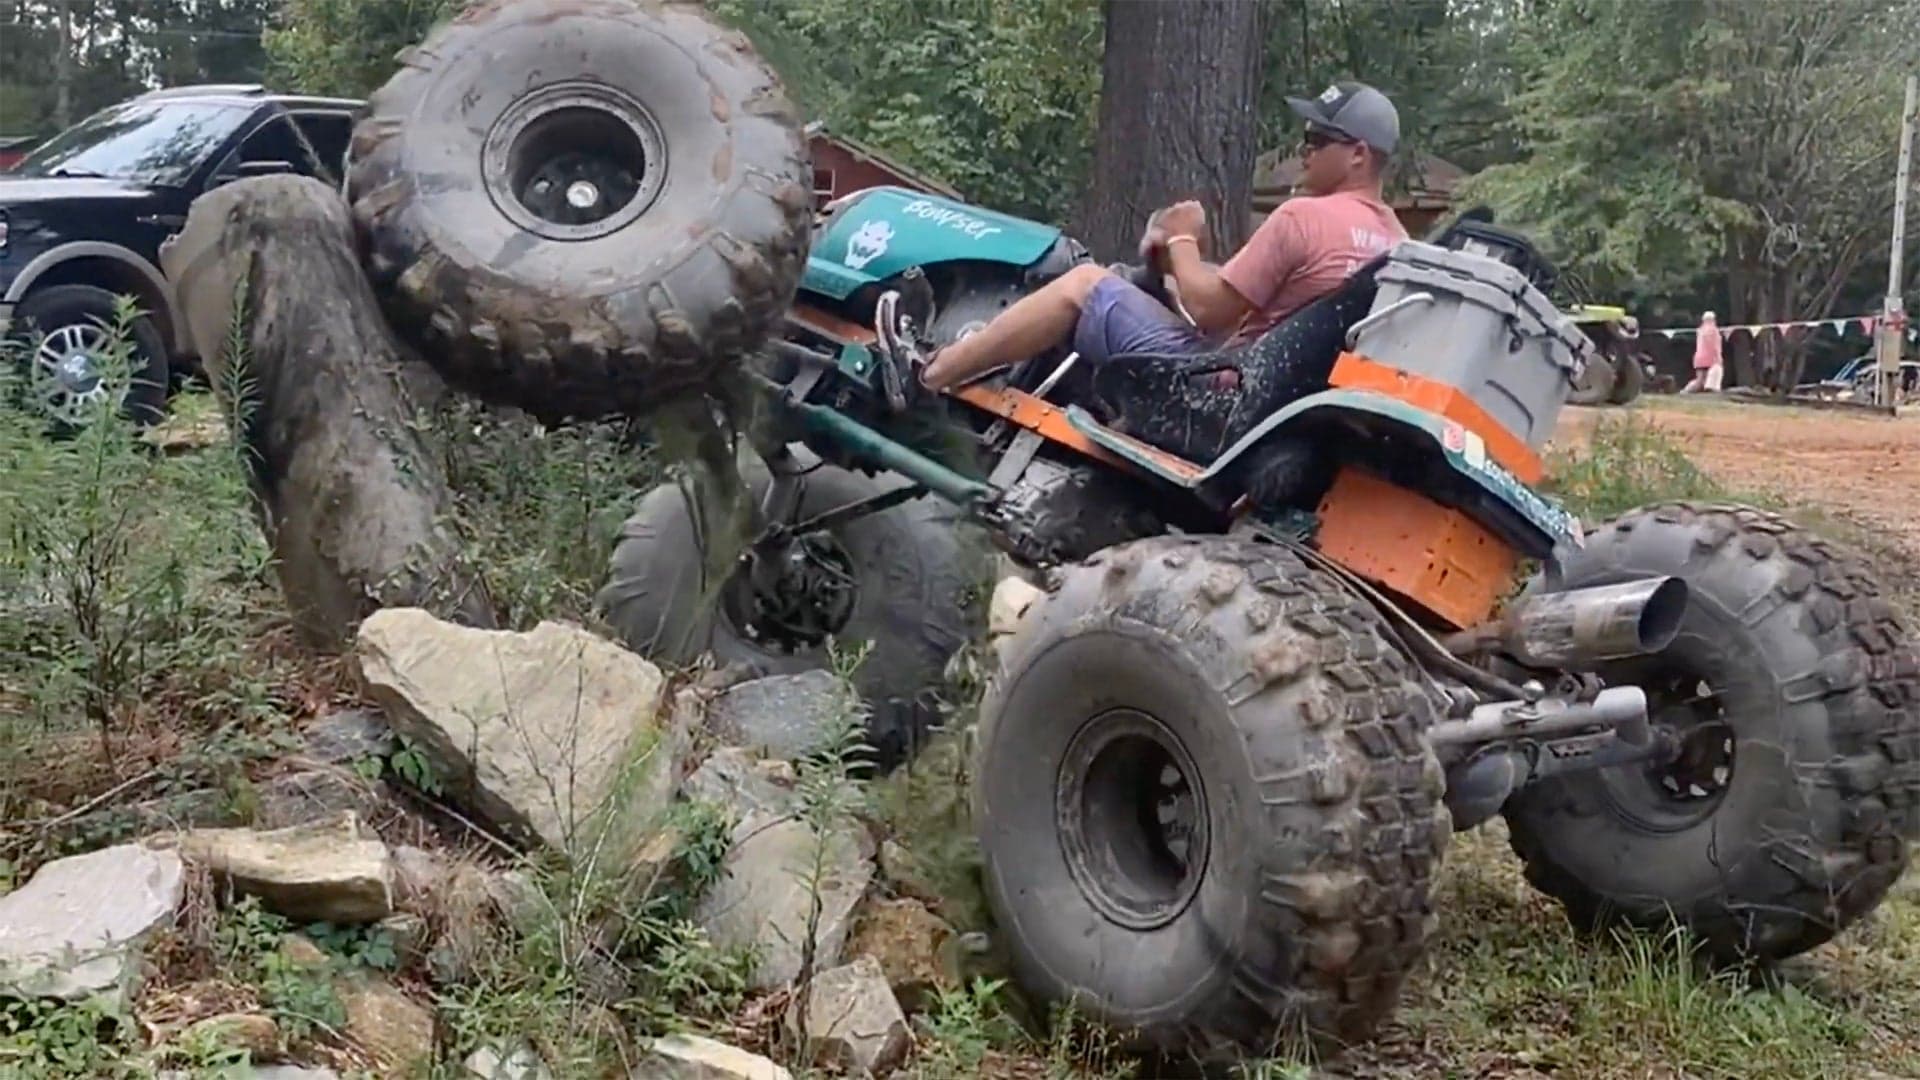 This Off-Road Lawn Mower on 38-Inch Mud Tires Can Flex with the Best